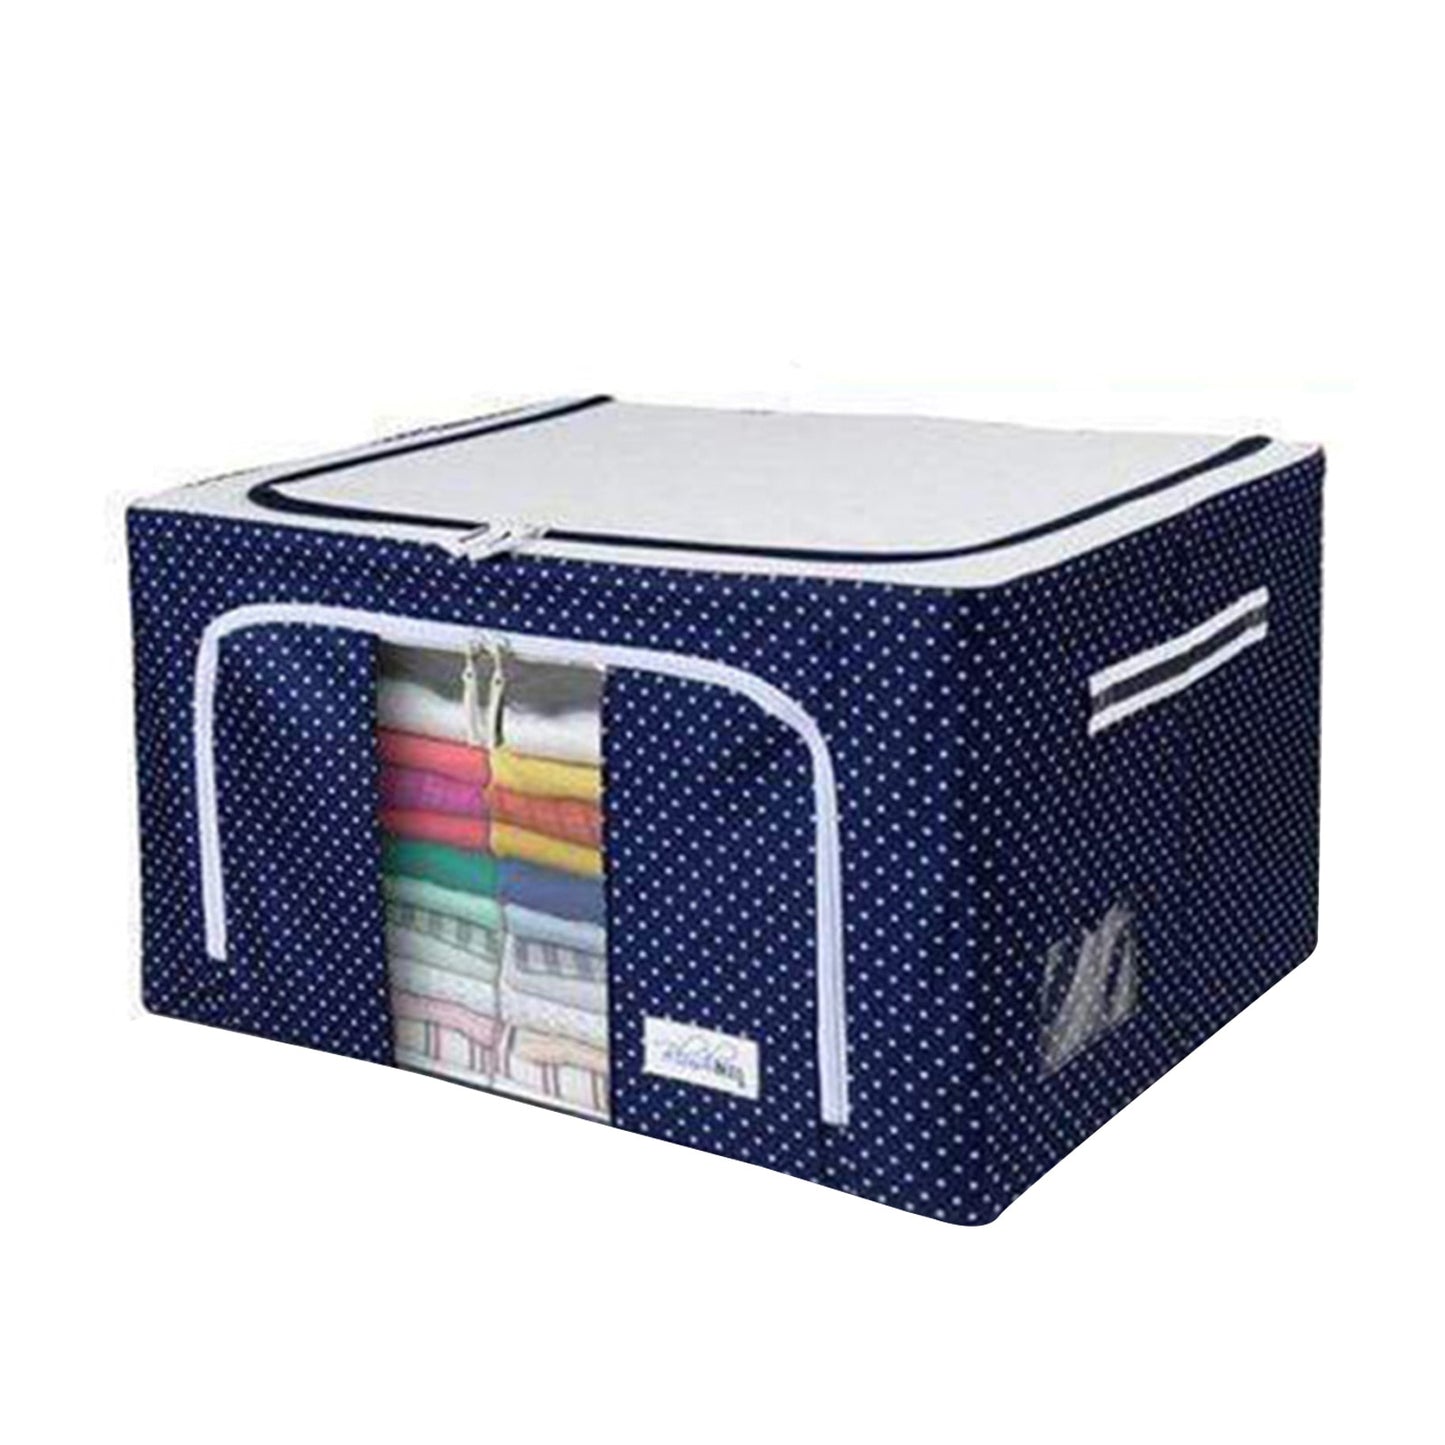 Fabric Foldable Storage Box With Steel Frame